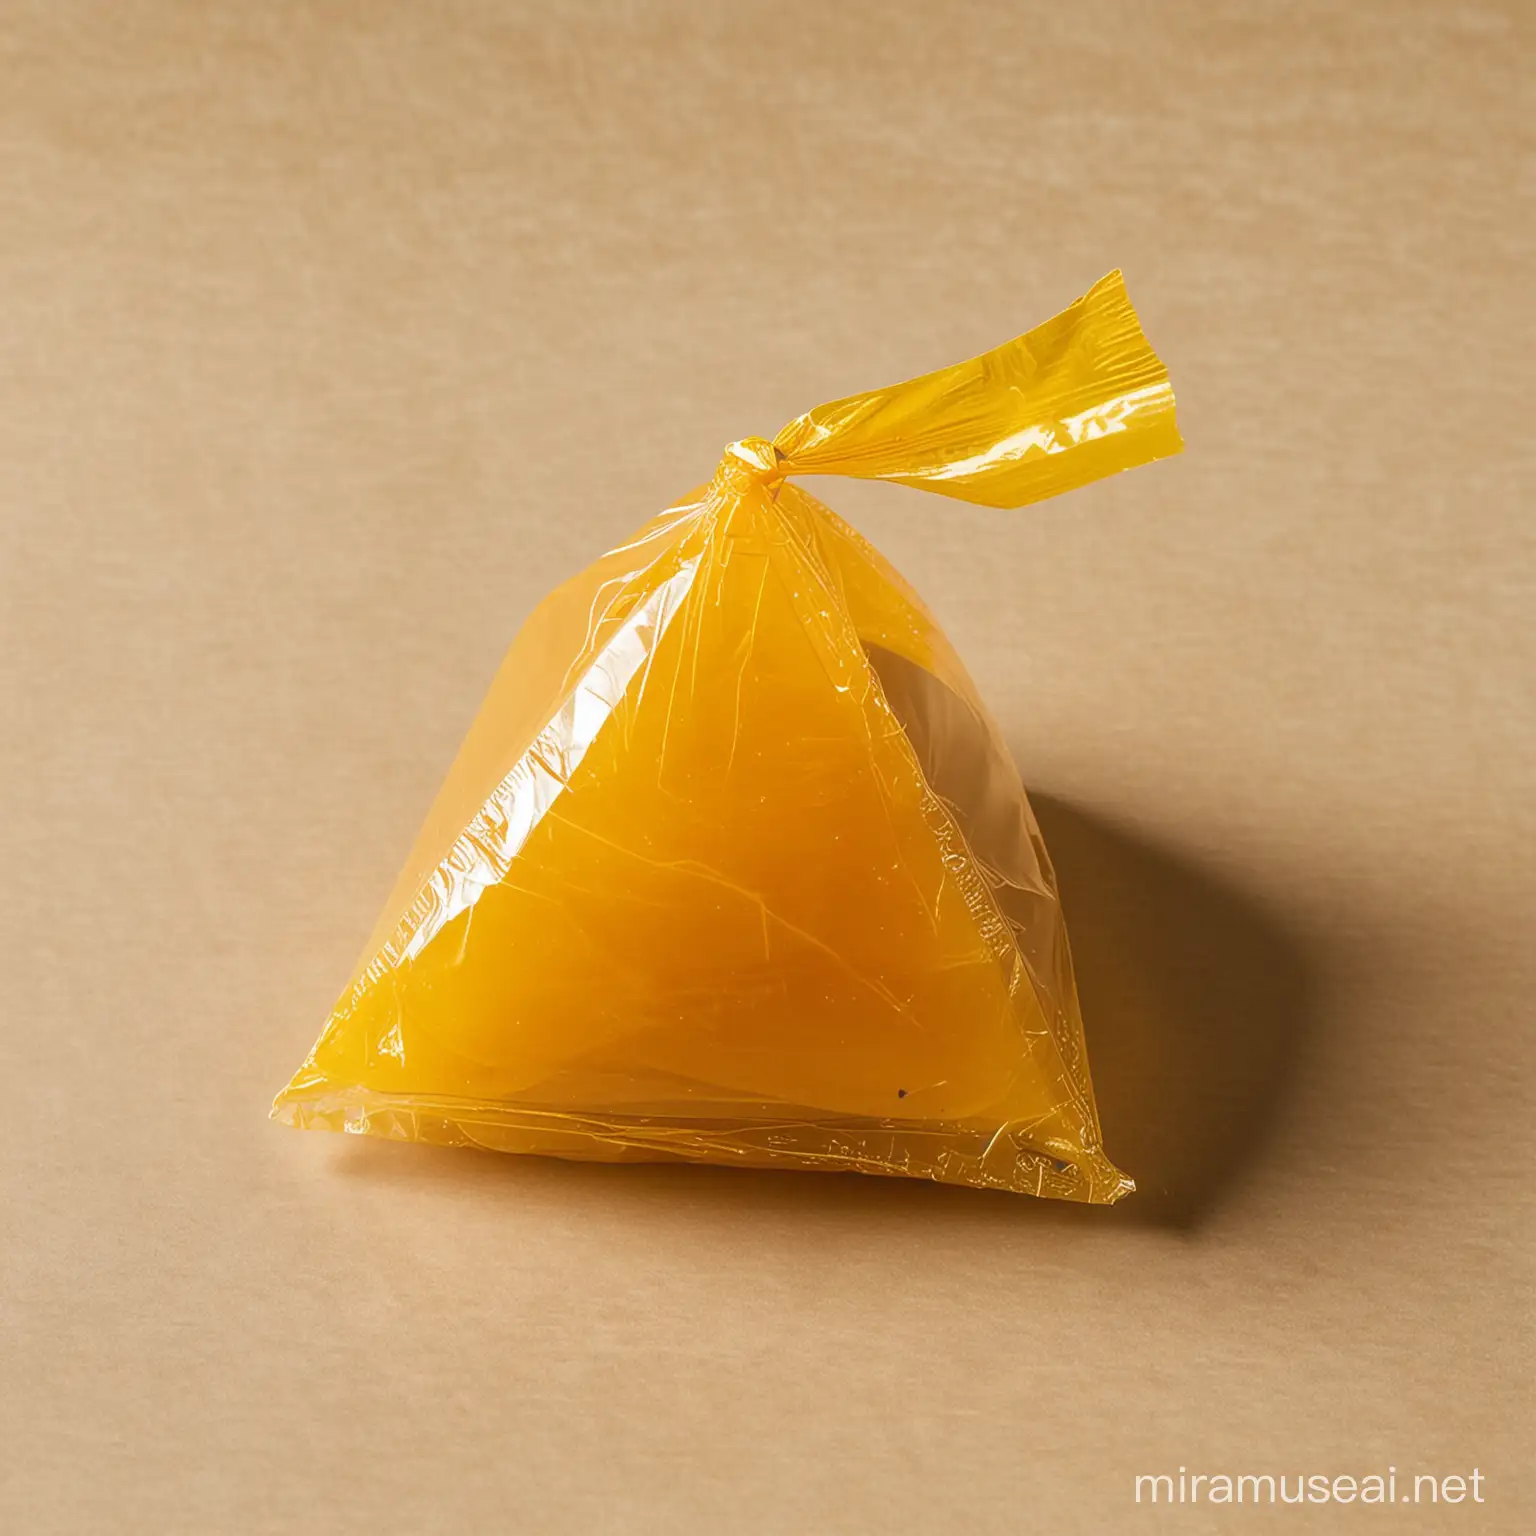 a filipino yema shaped in a pyramid form wrapped in a yellow cellophane 